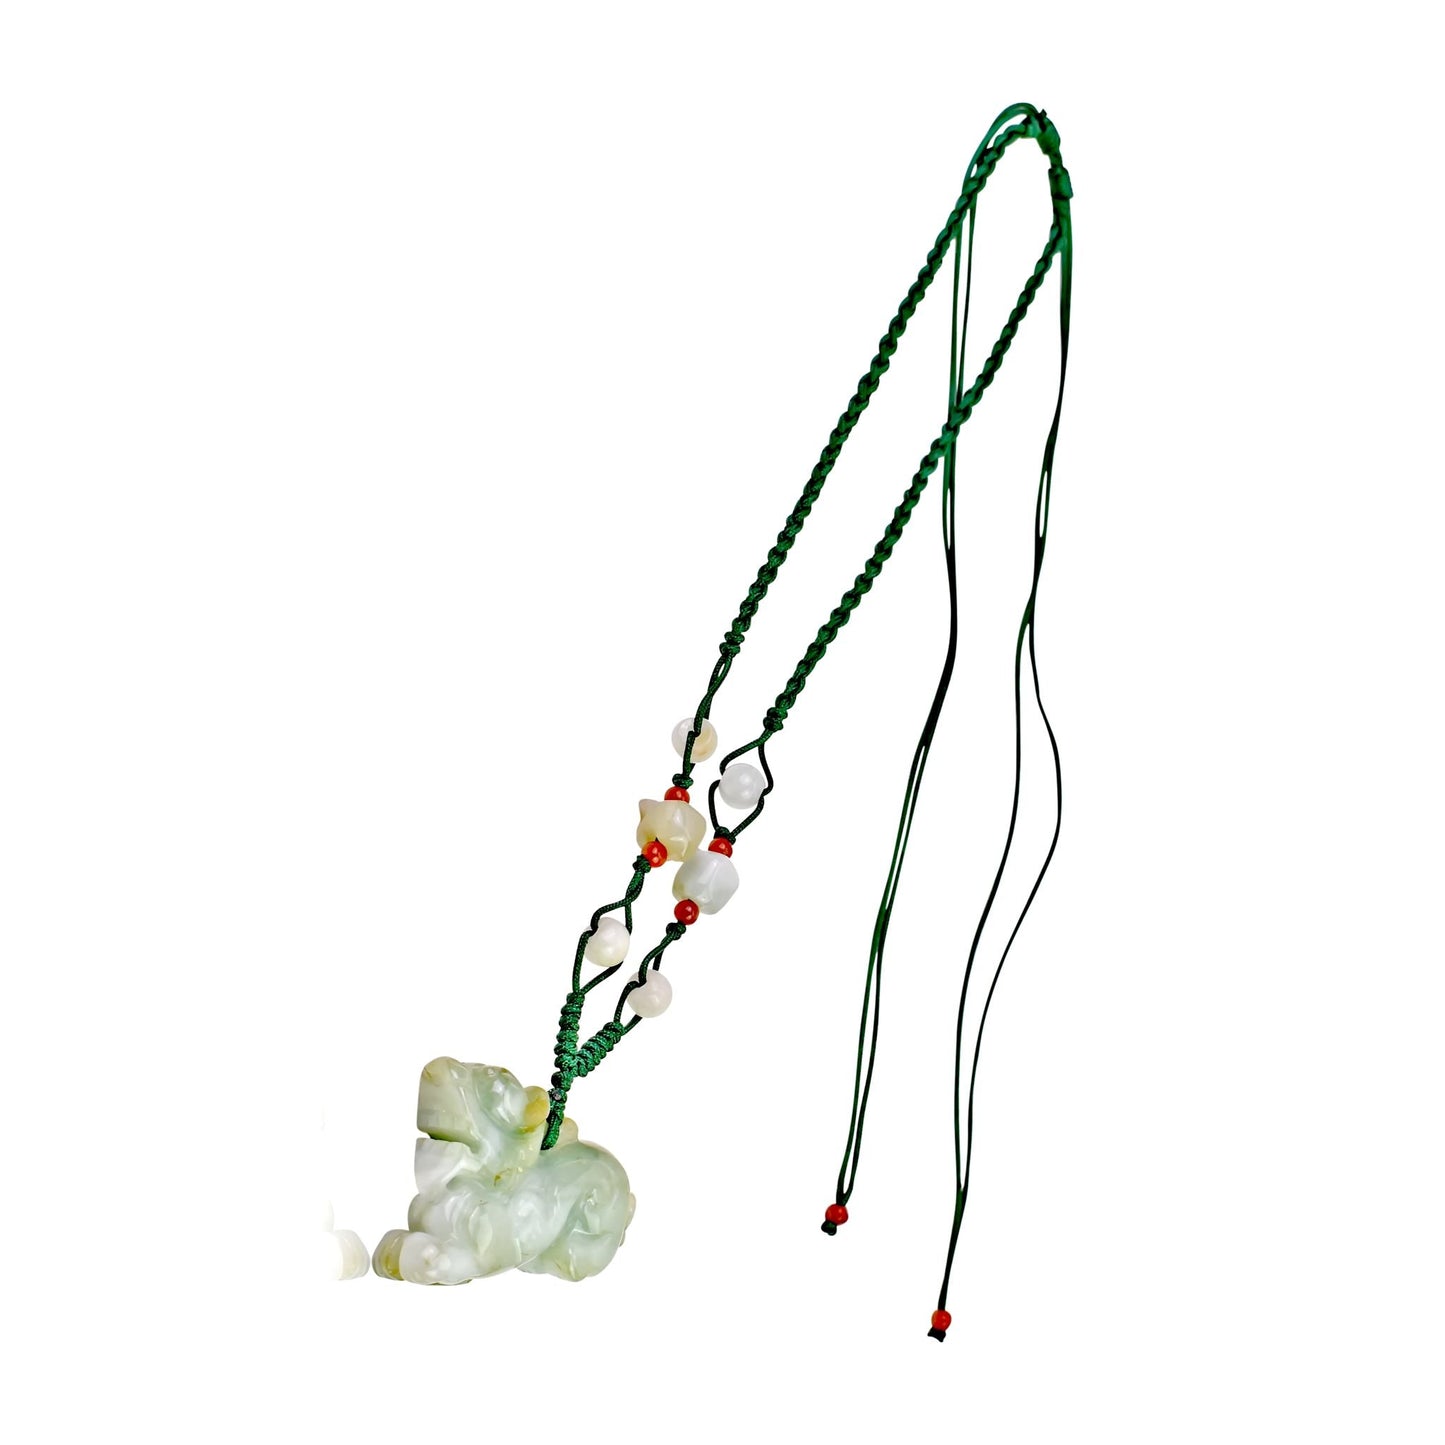 Showcase Your Style with the One-of-a-Kind Lion Jade Necklace with Green Cord